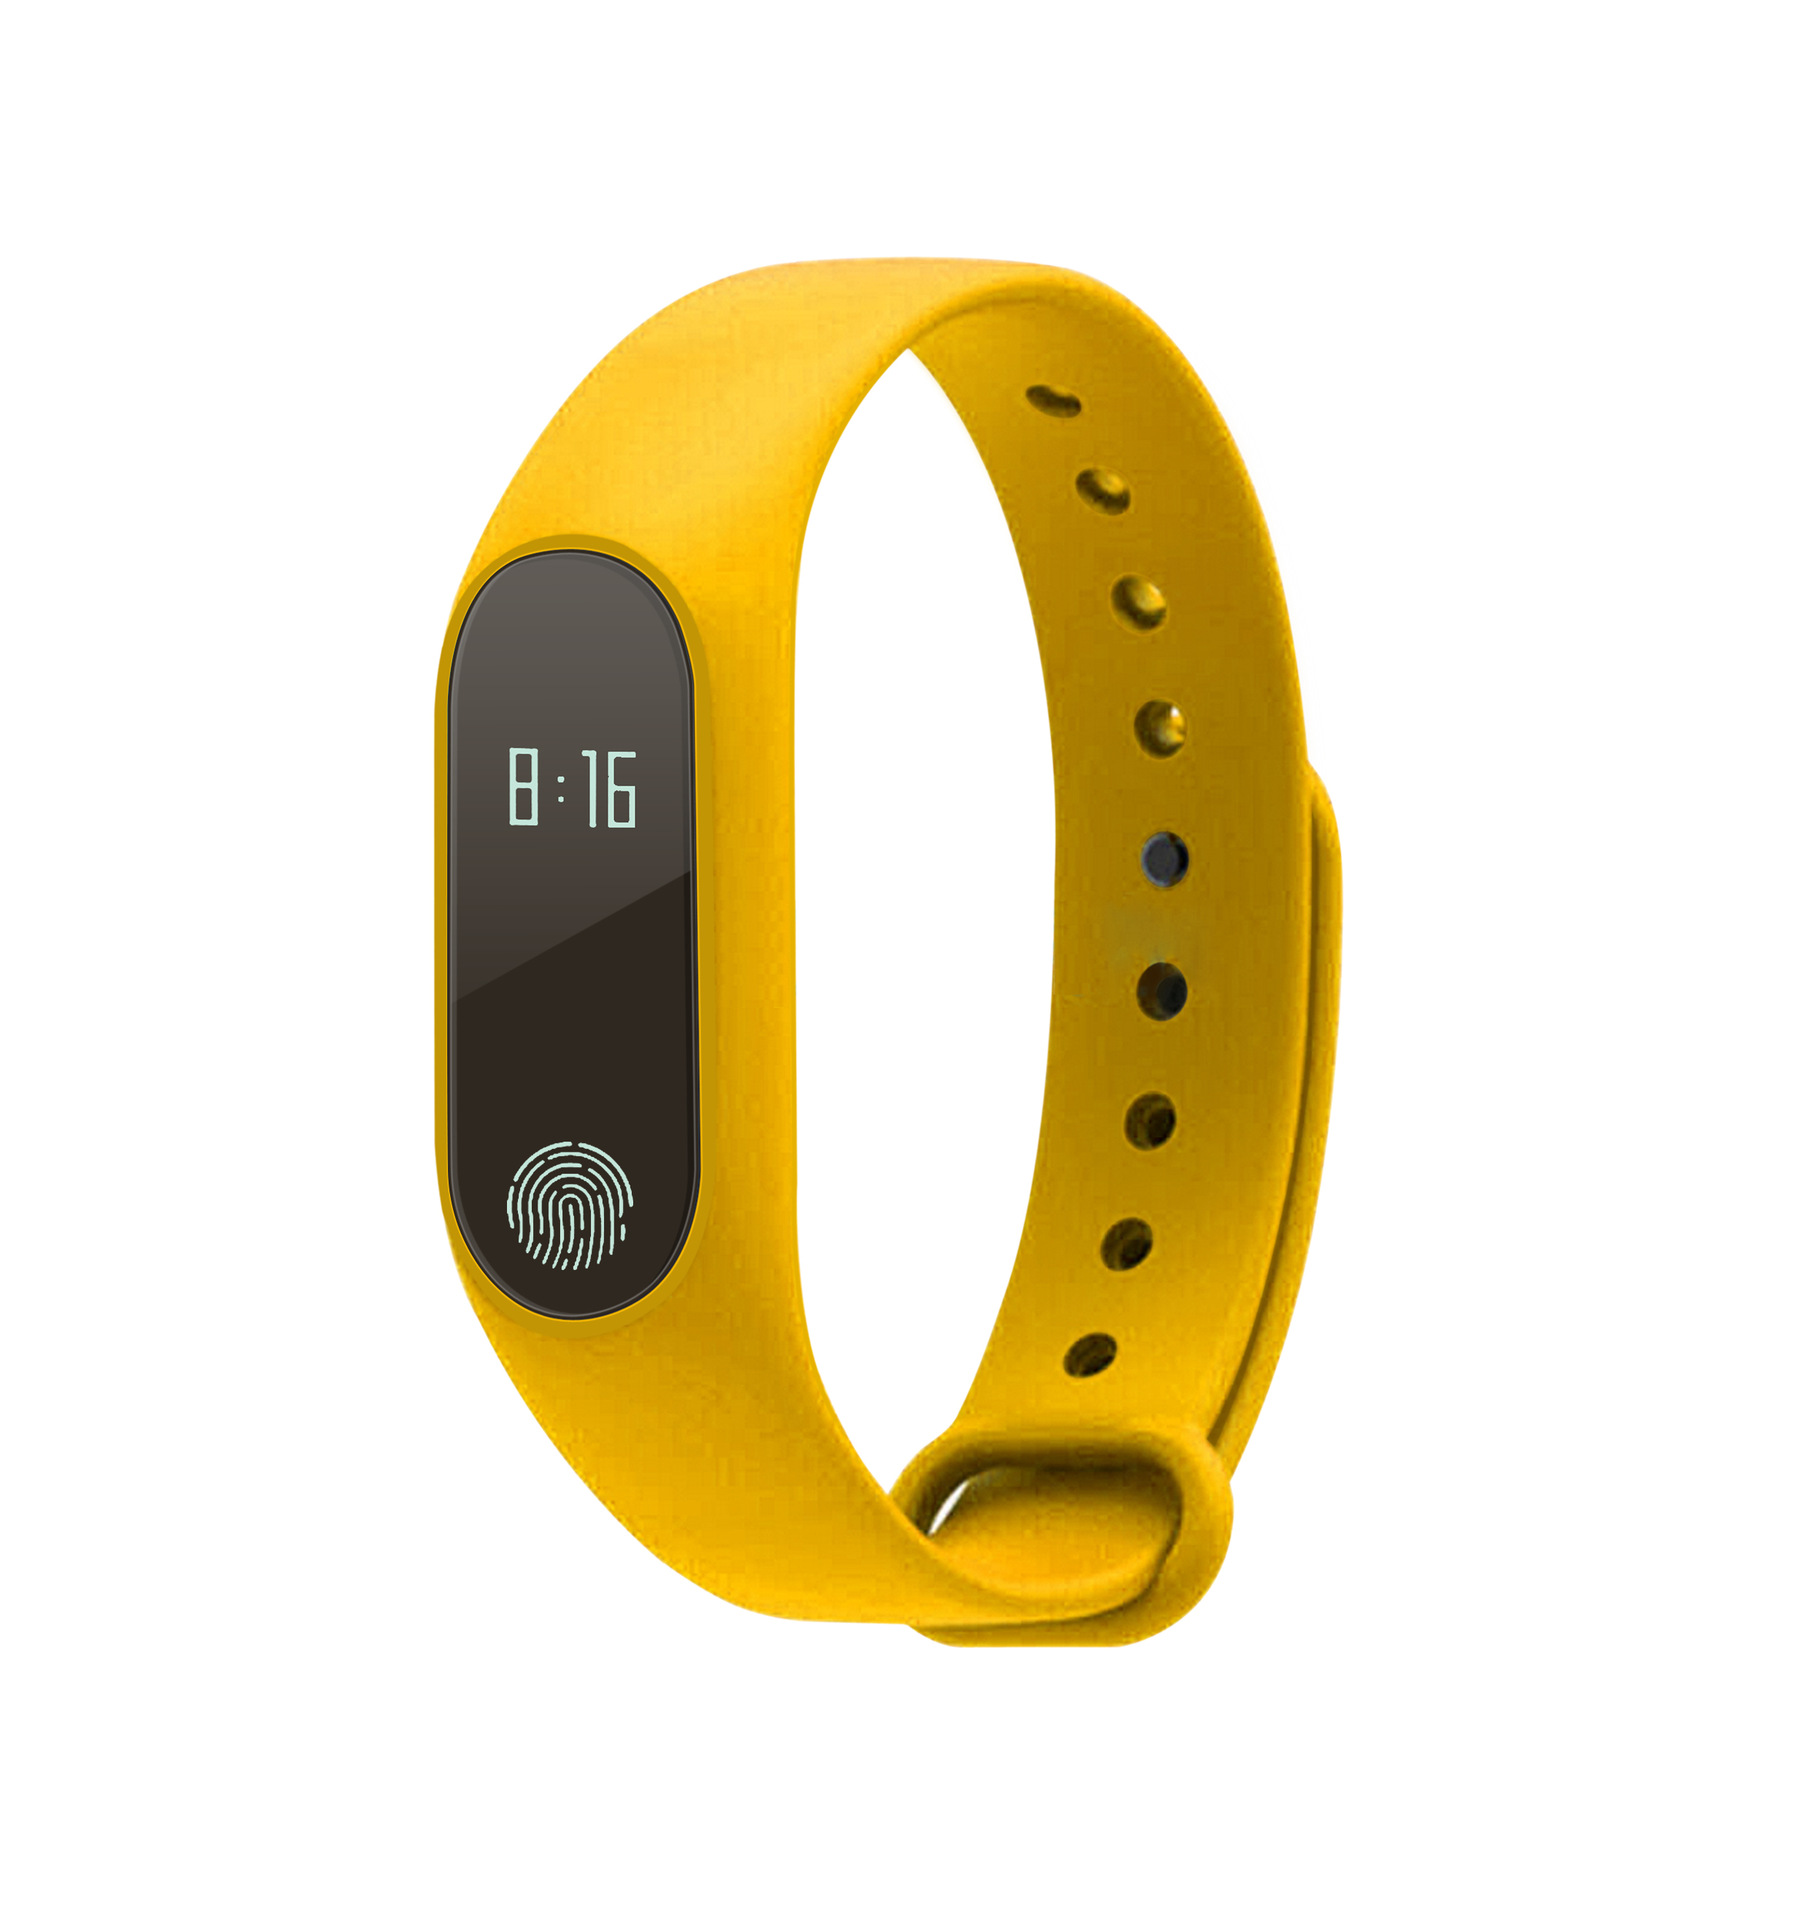 what apps work with m2 smart band